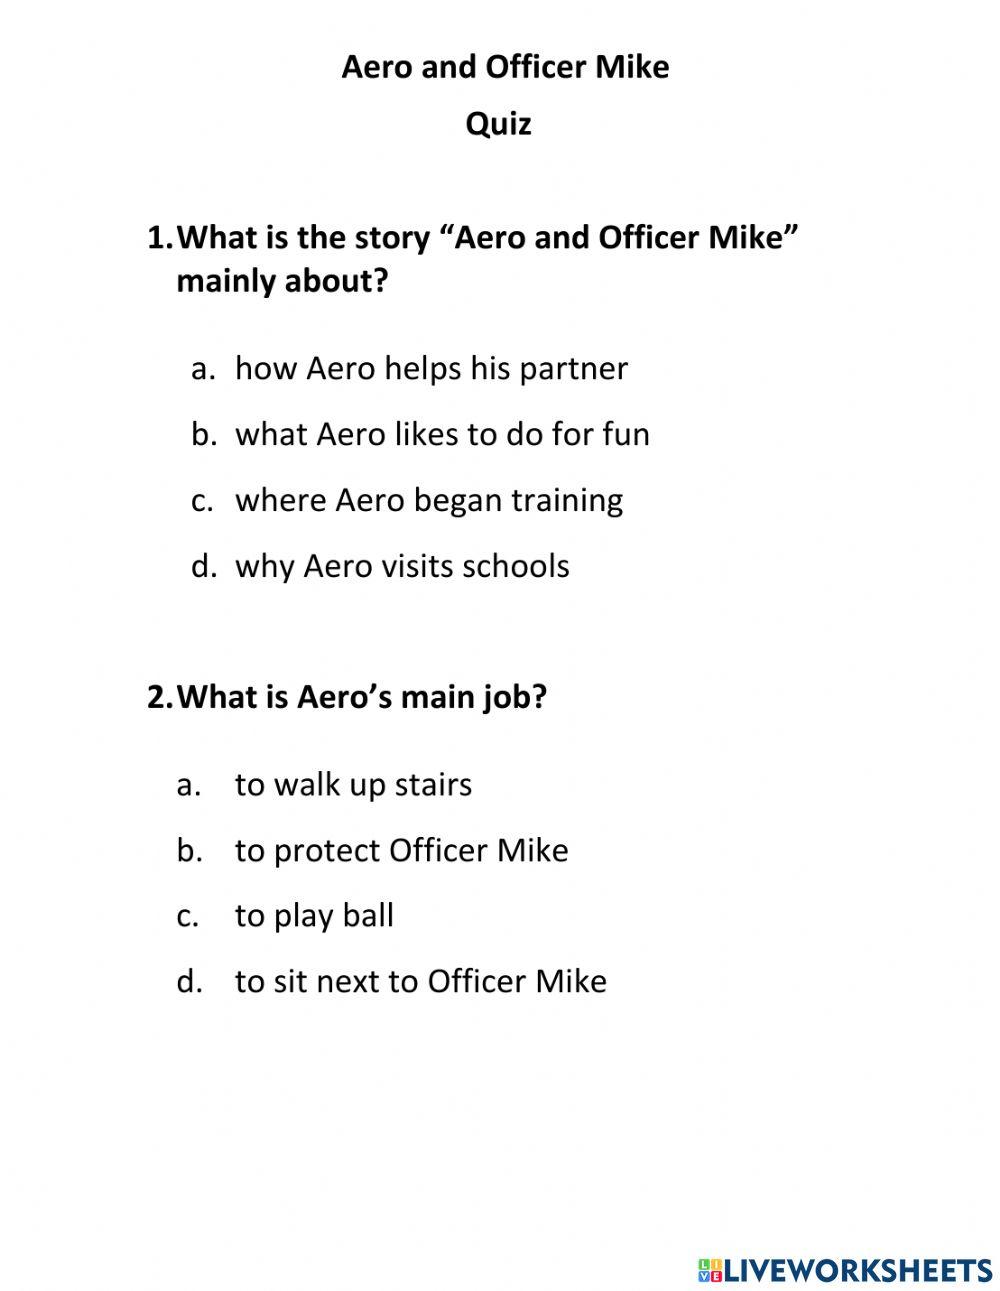 Aero and Officer Mike